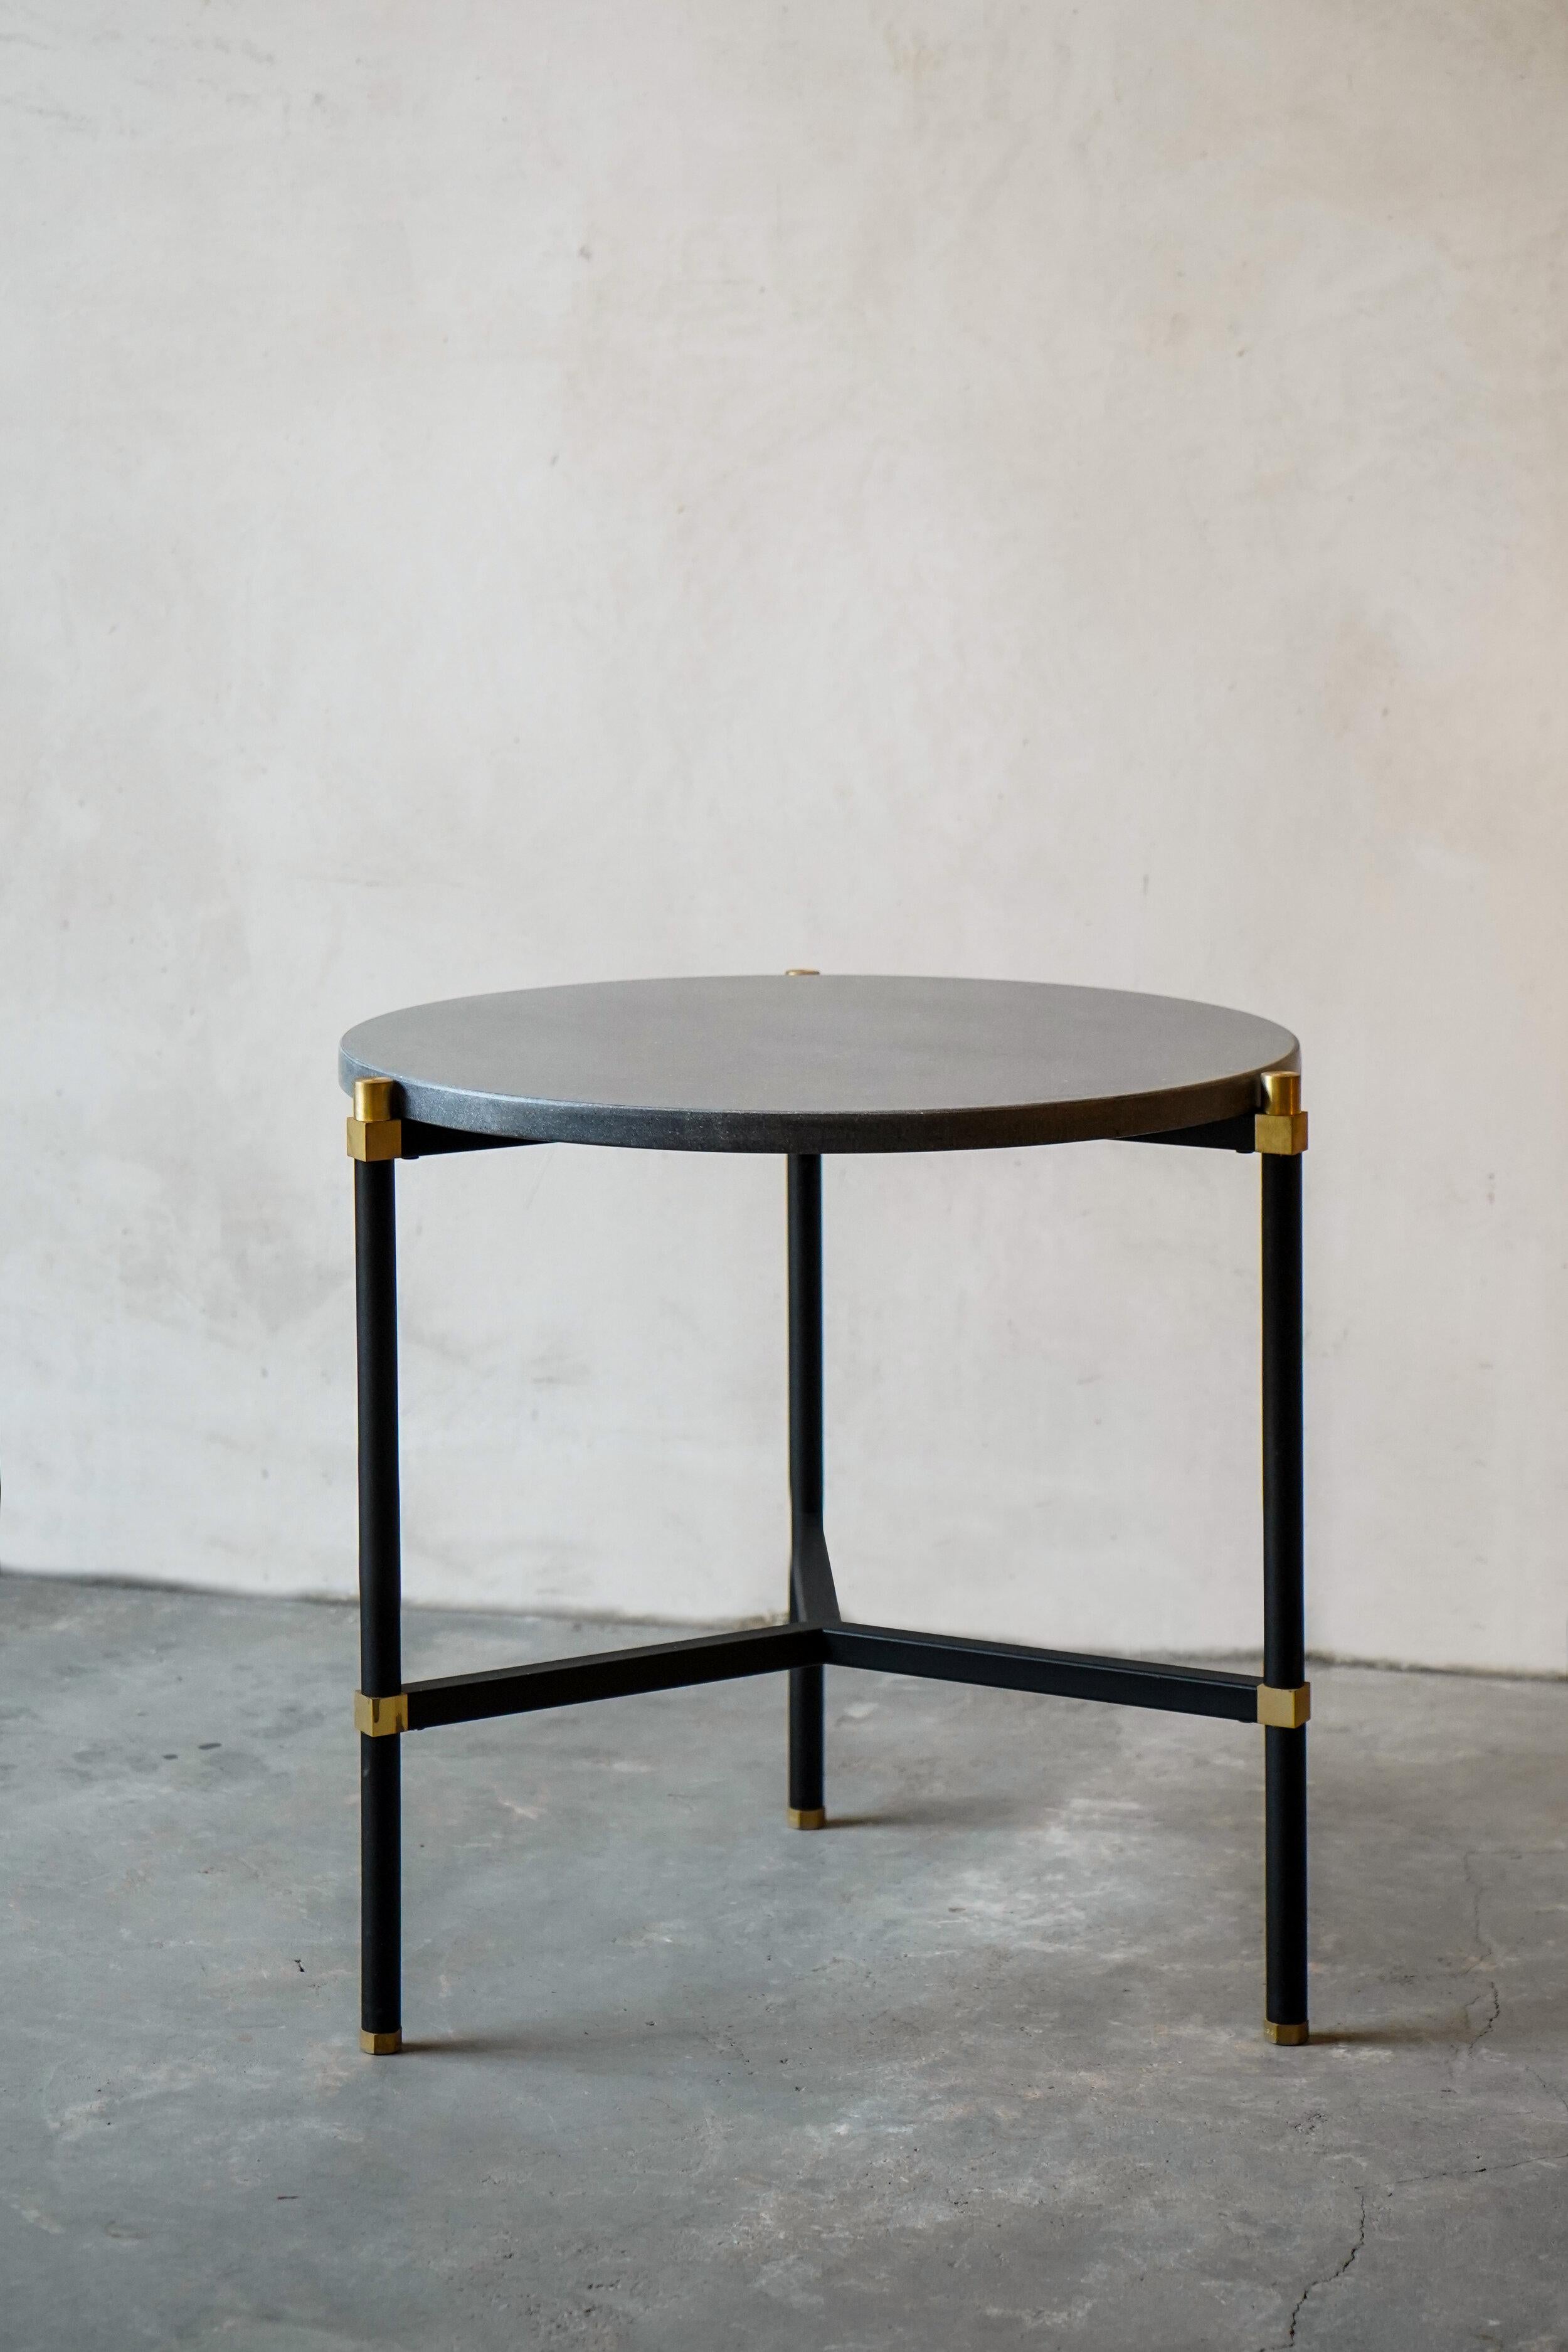 Simple side table 50 3 legs by Contain
Dimensions: D 50 x H 51 cm 
Materials: Iron, brass, terrazzo, marble, stone.
Available in different finishes and dimensions.

The Connector furniture collection is based on single assembly pieces that get